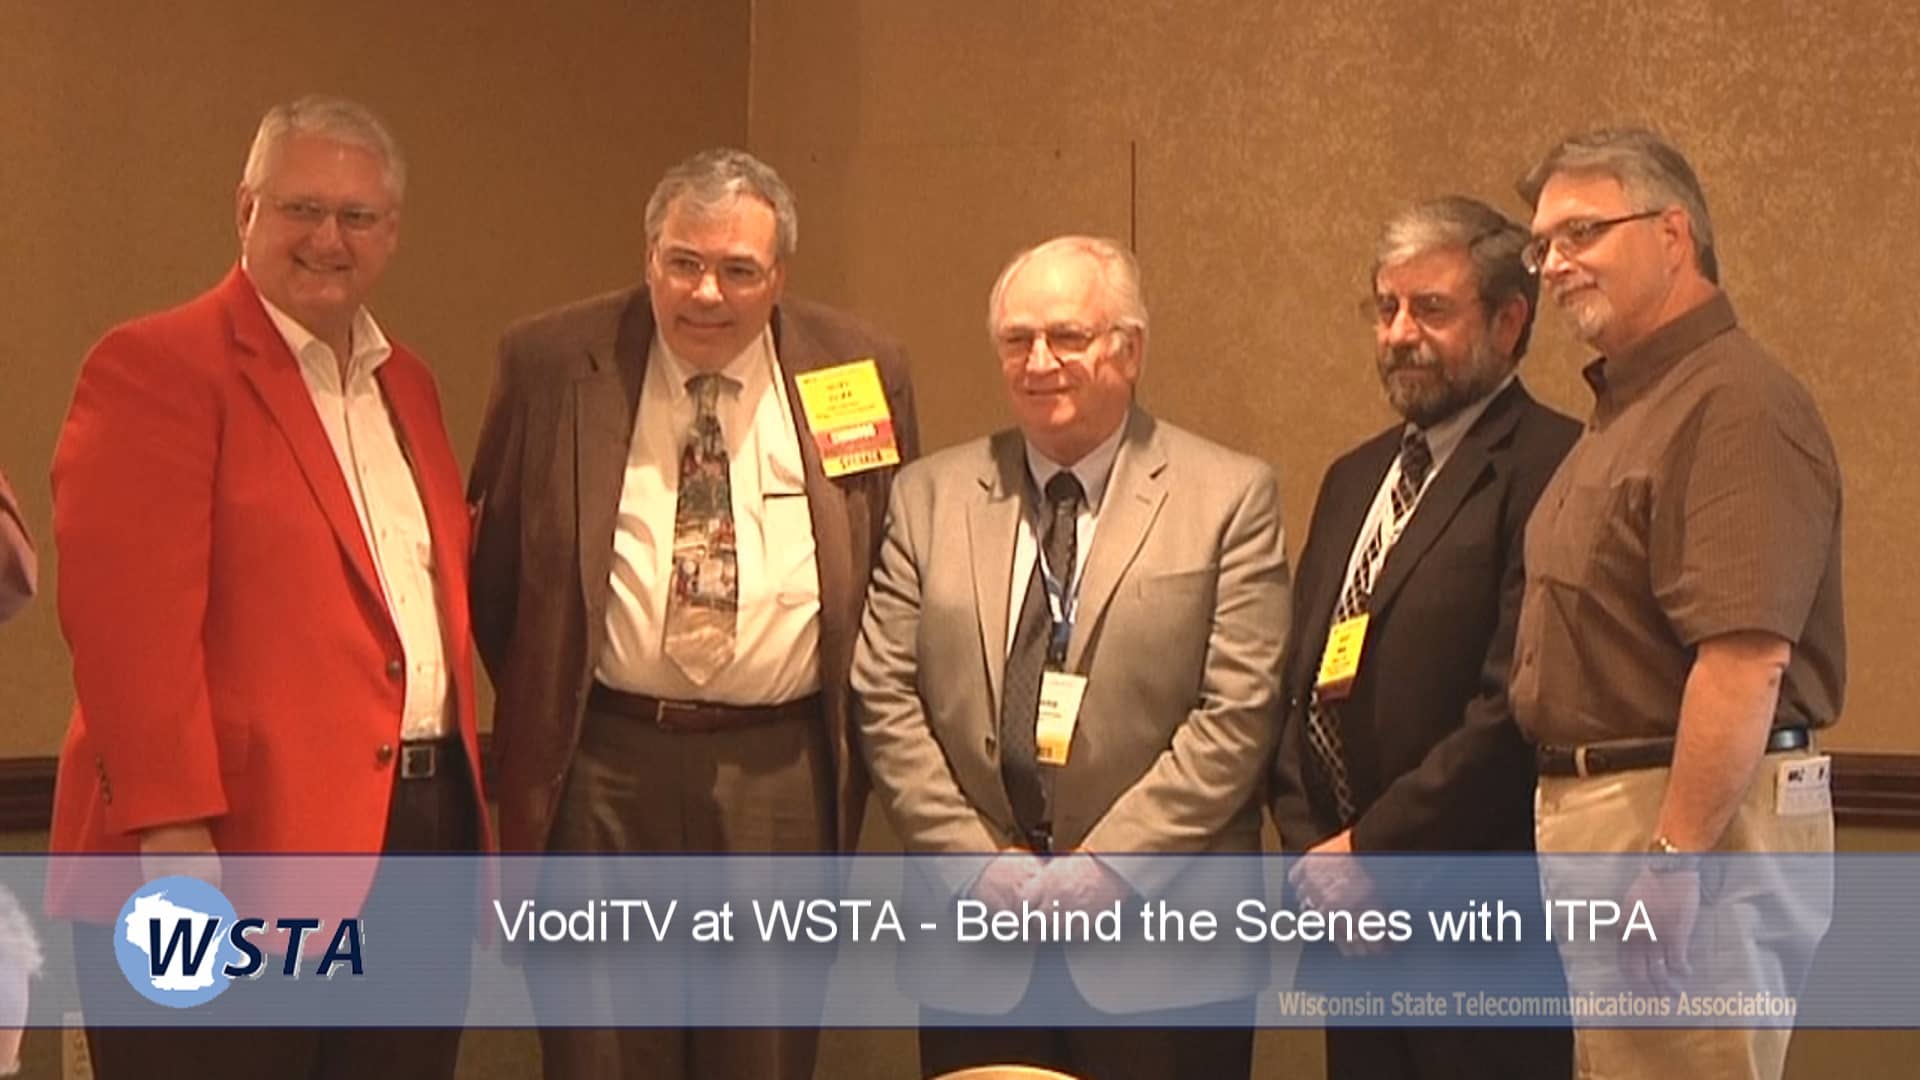 Behind the Scene at WSTA with ITPA